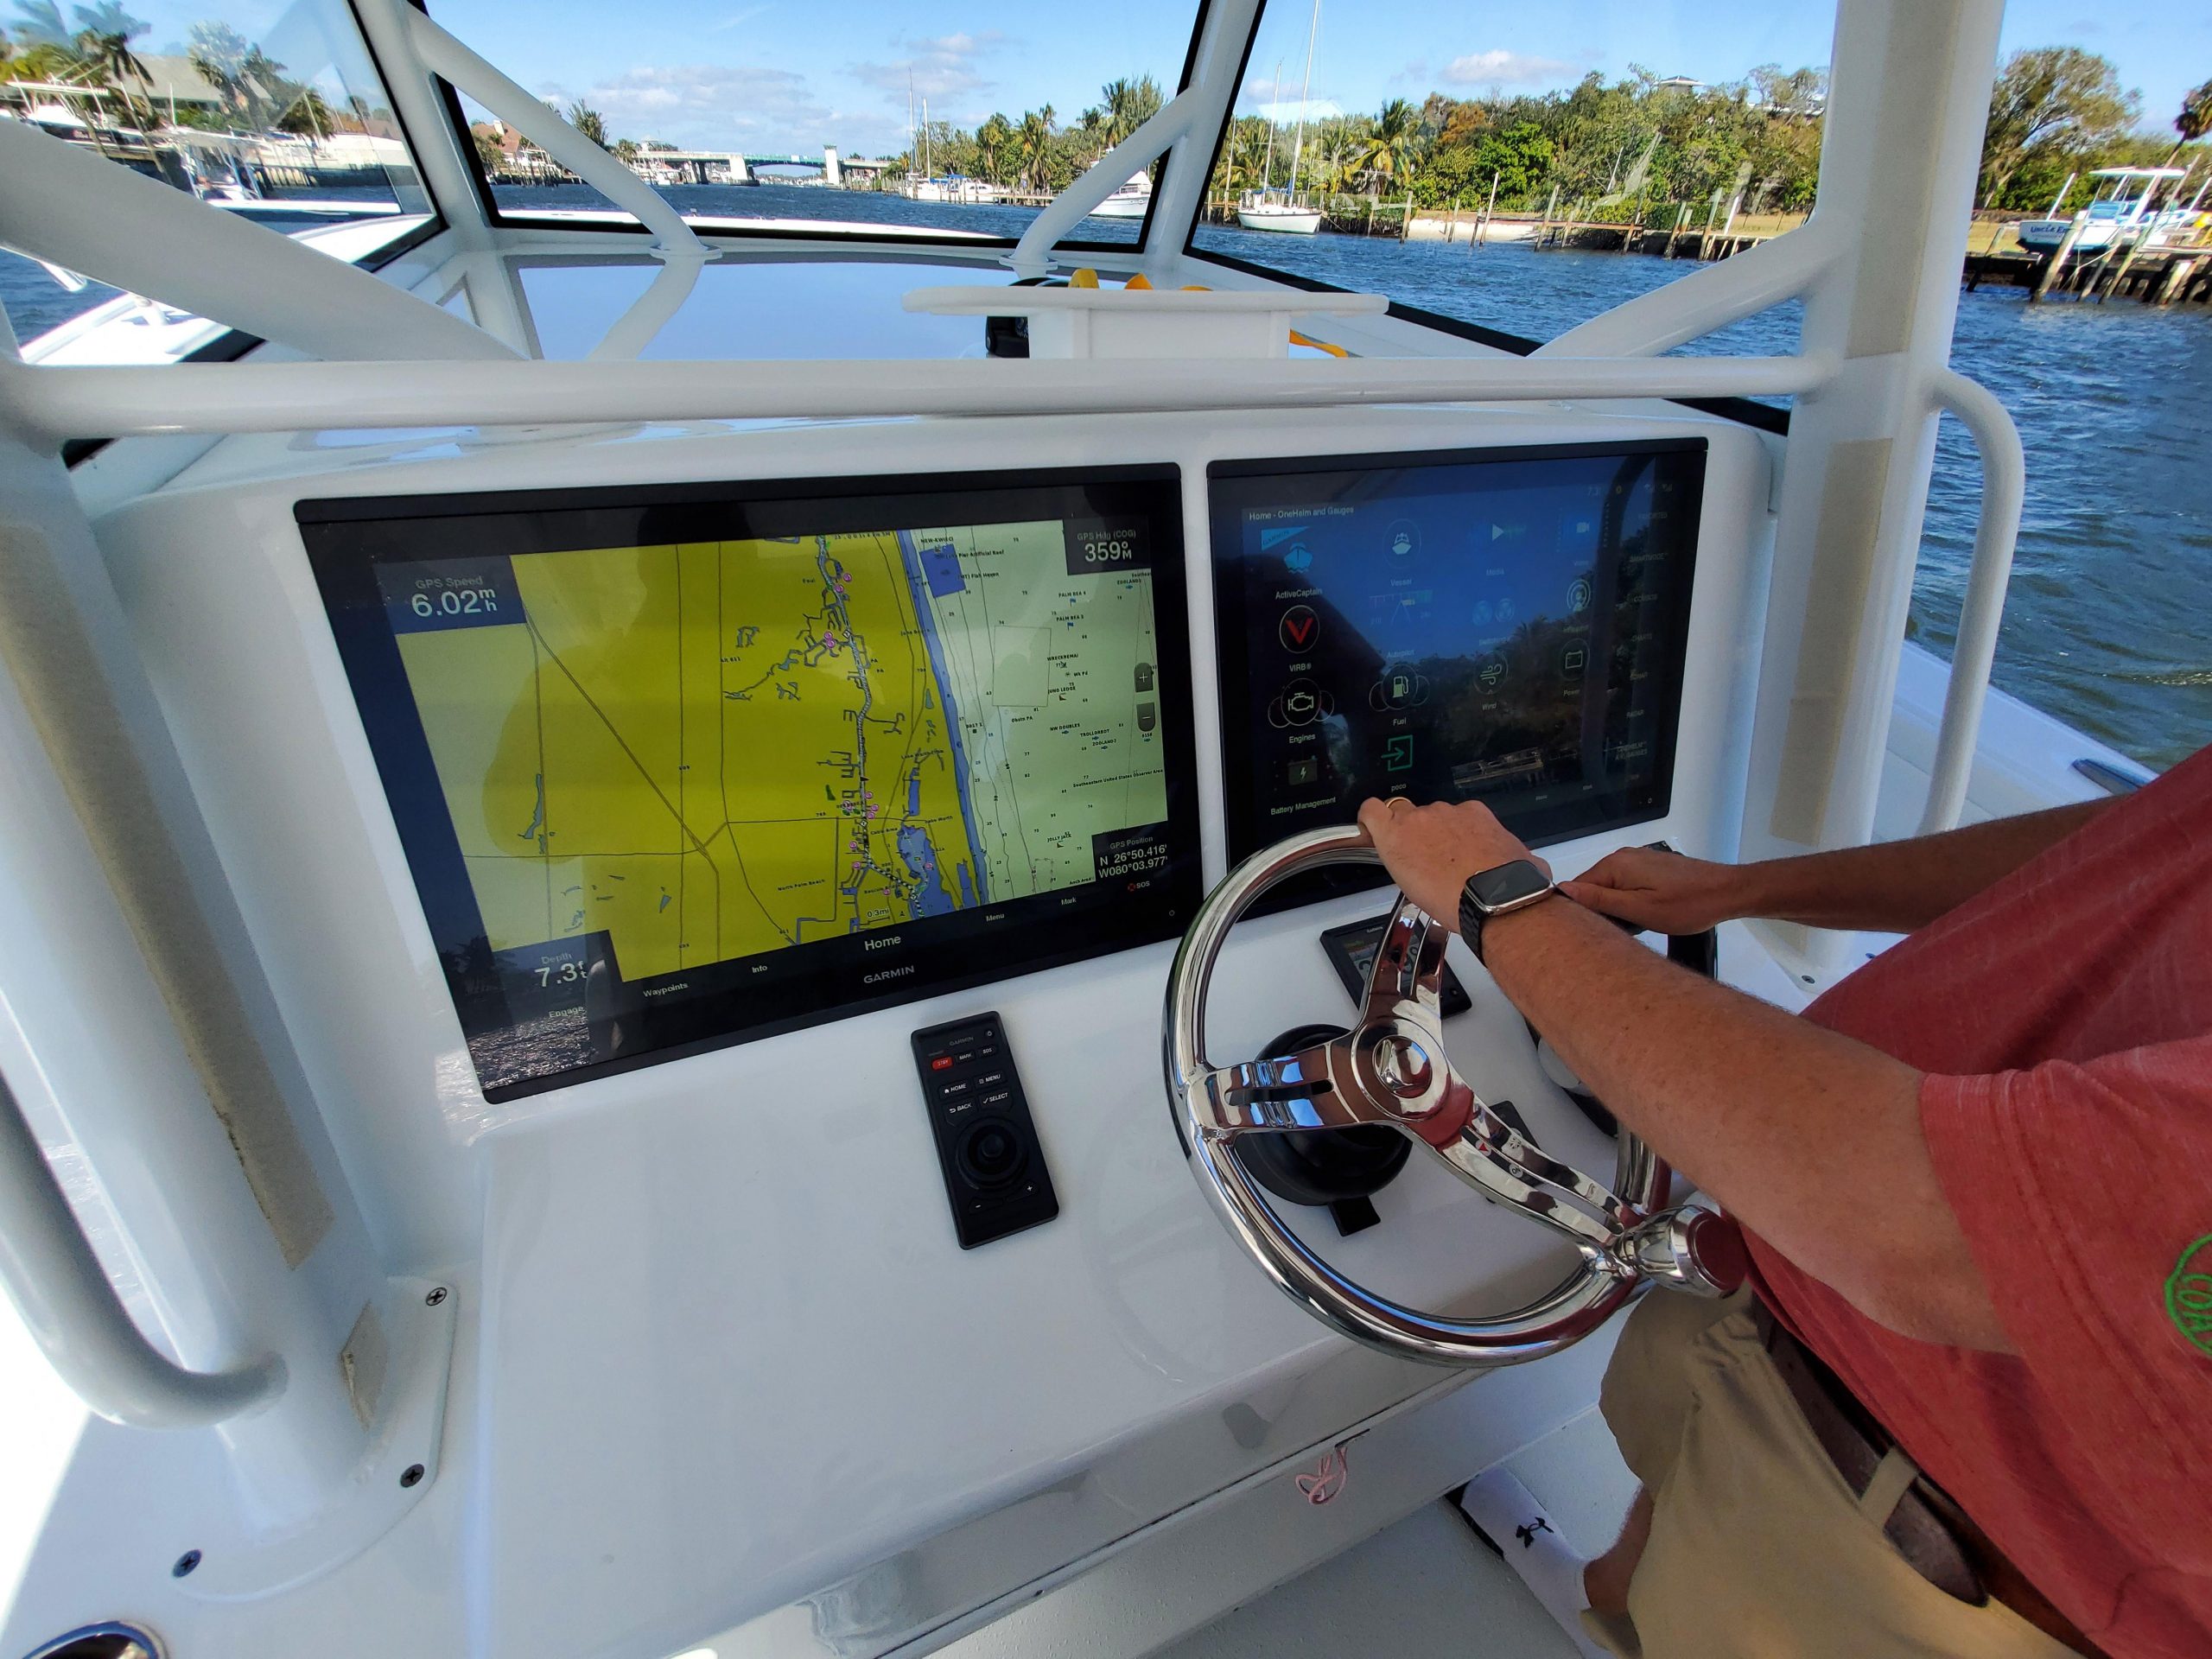 Boat GPS Systems Explained: What's The Best? - Boat Trader Blog